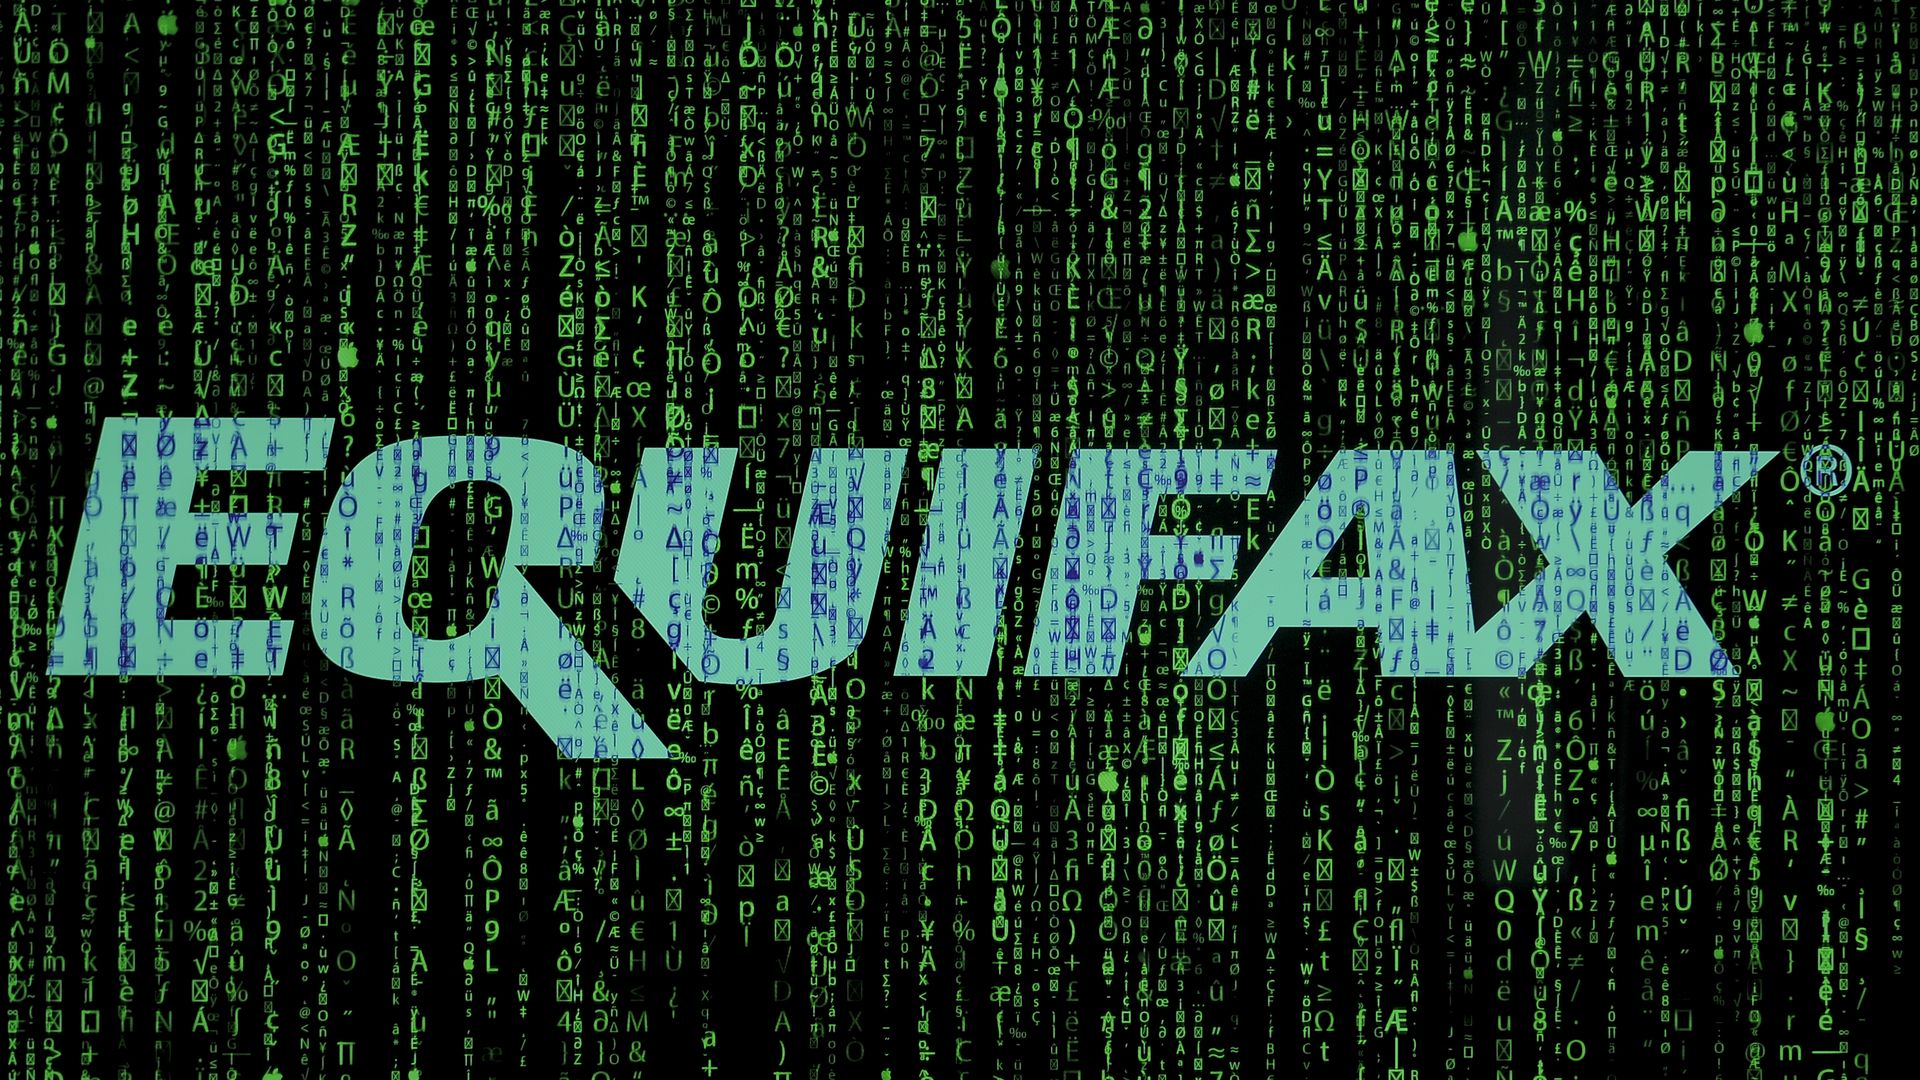 Equifax logo in white before data in green.